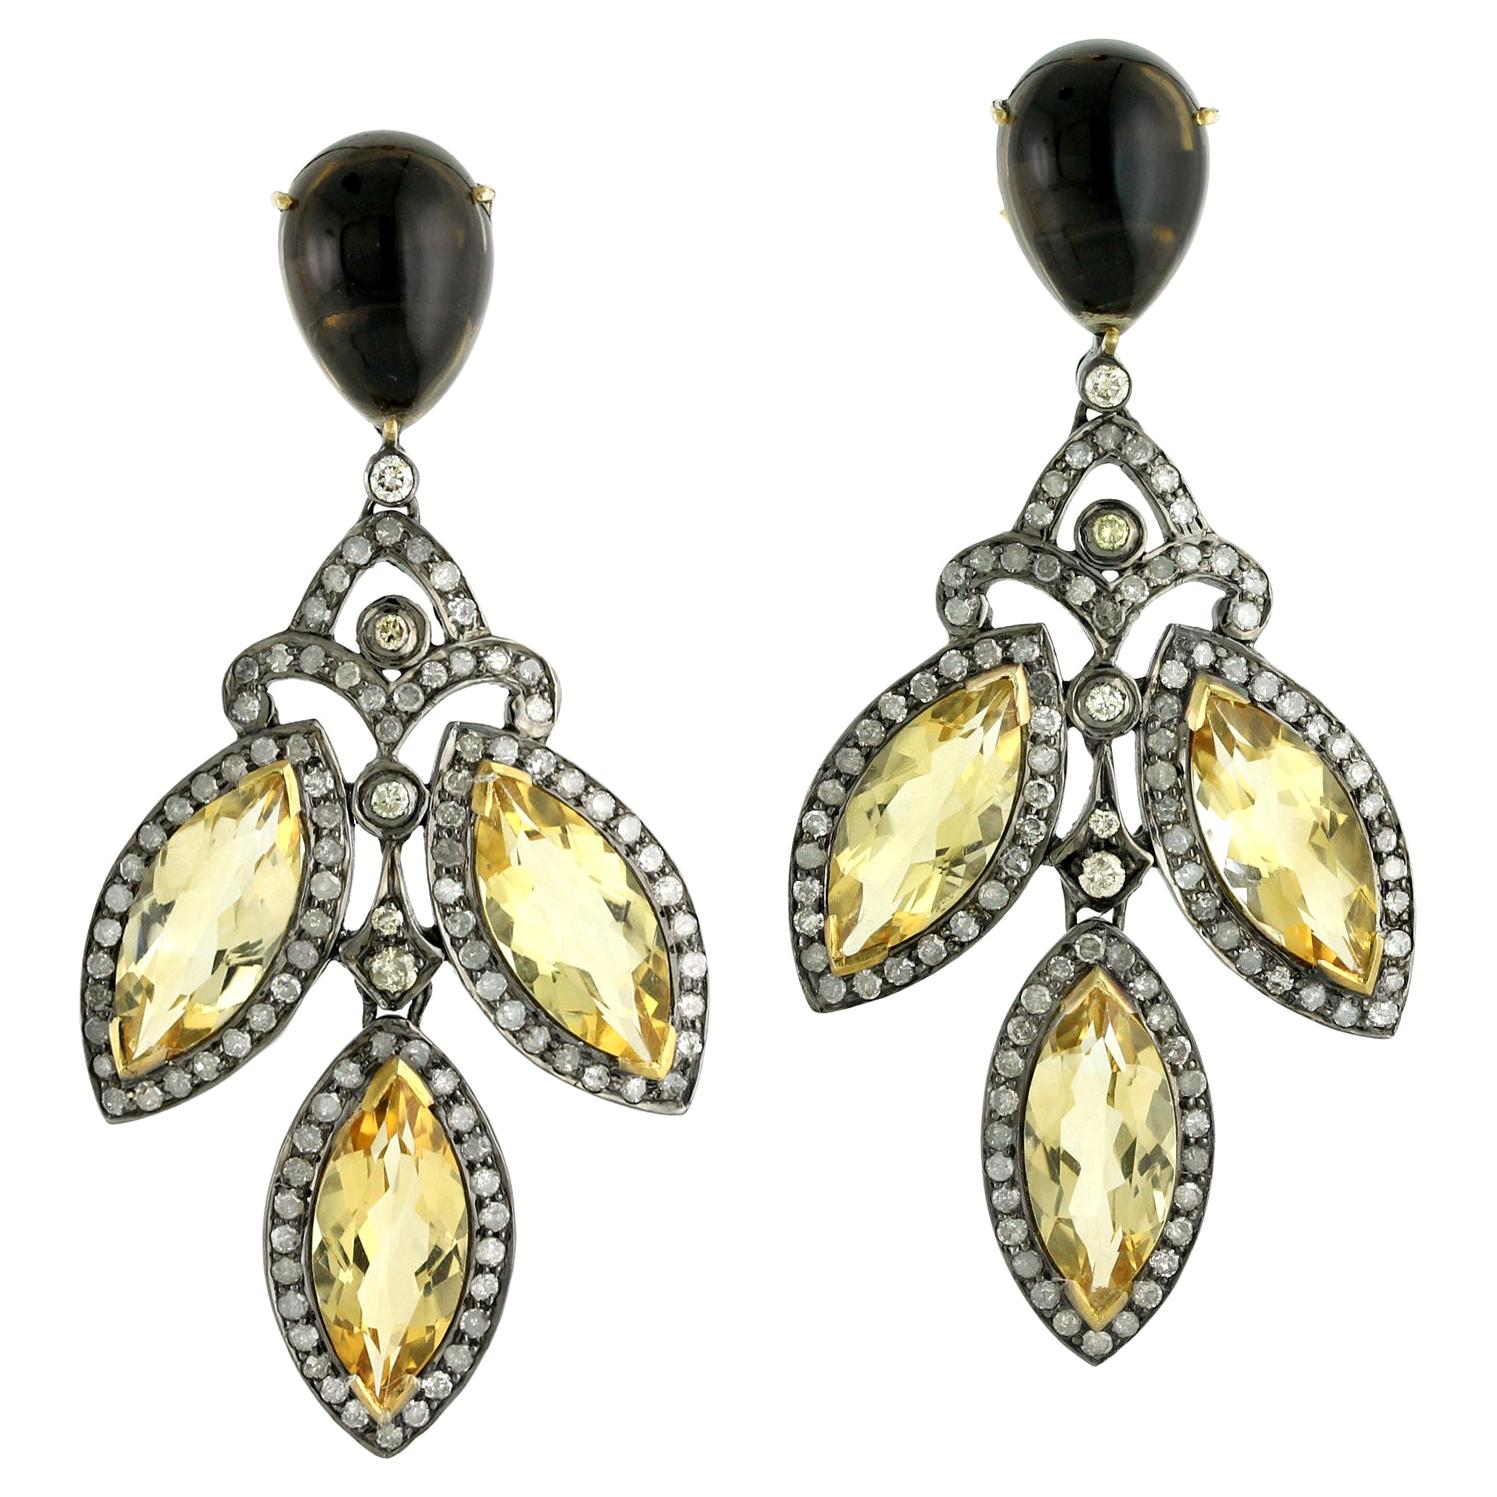 Designer Chandelier Citrine Smoky Quartz and Diamond Earrings in Gold and Silver